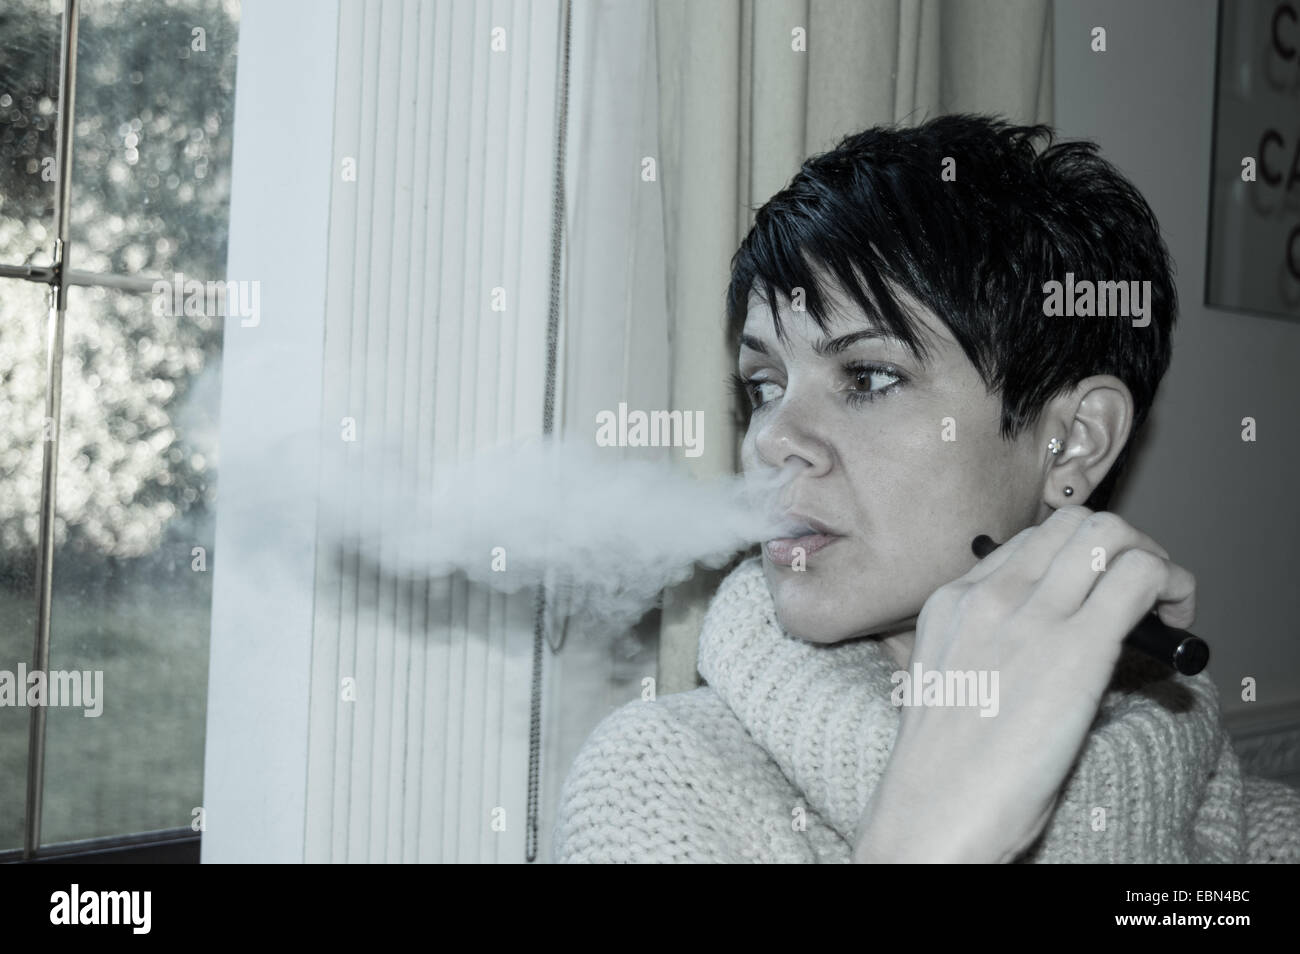 Beautiful short, dark haired woman vaping and looking out of a window deep in thought Stock Photo